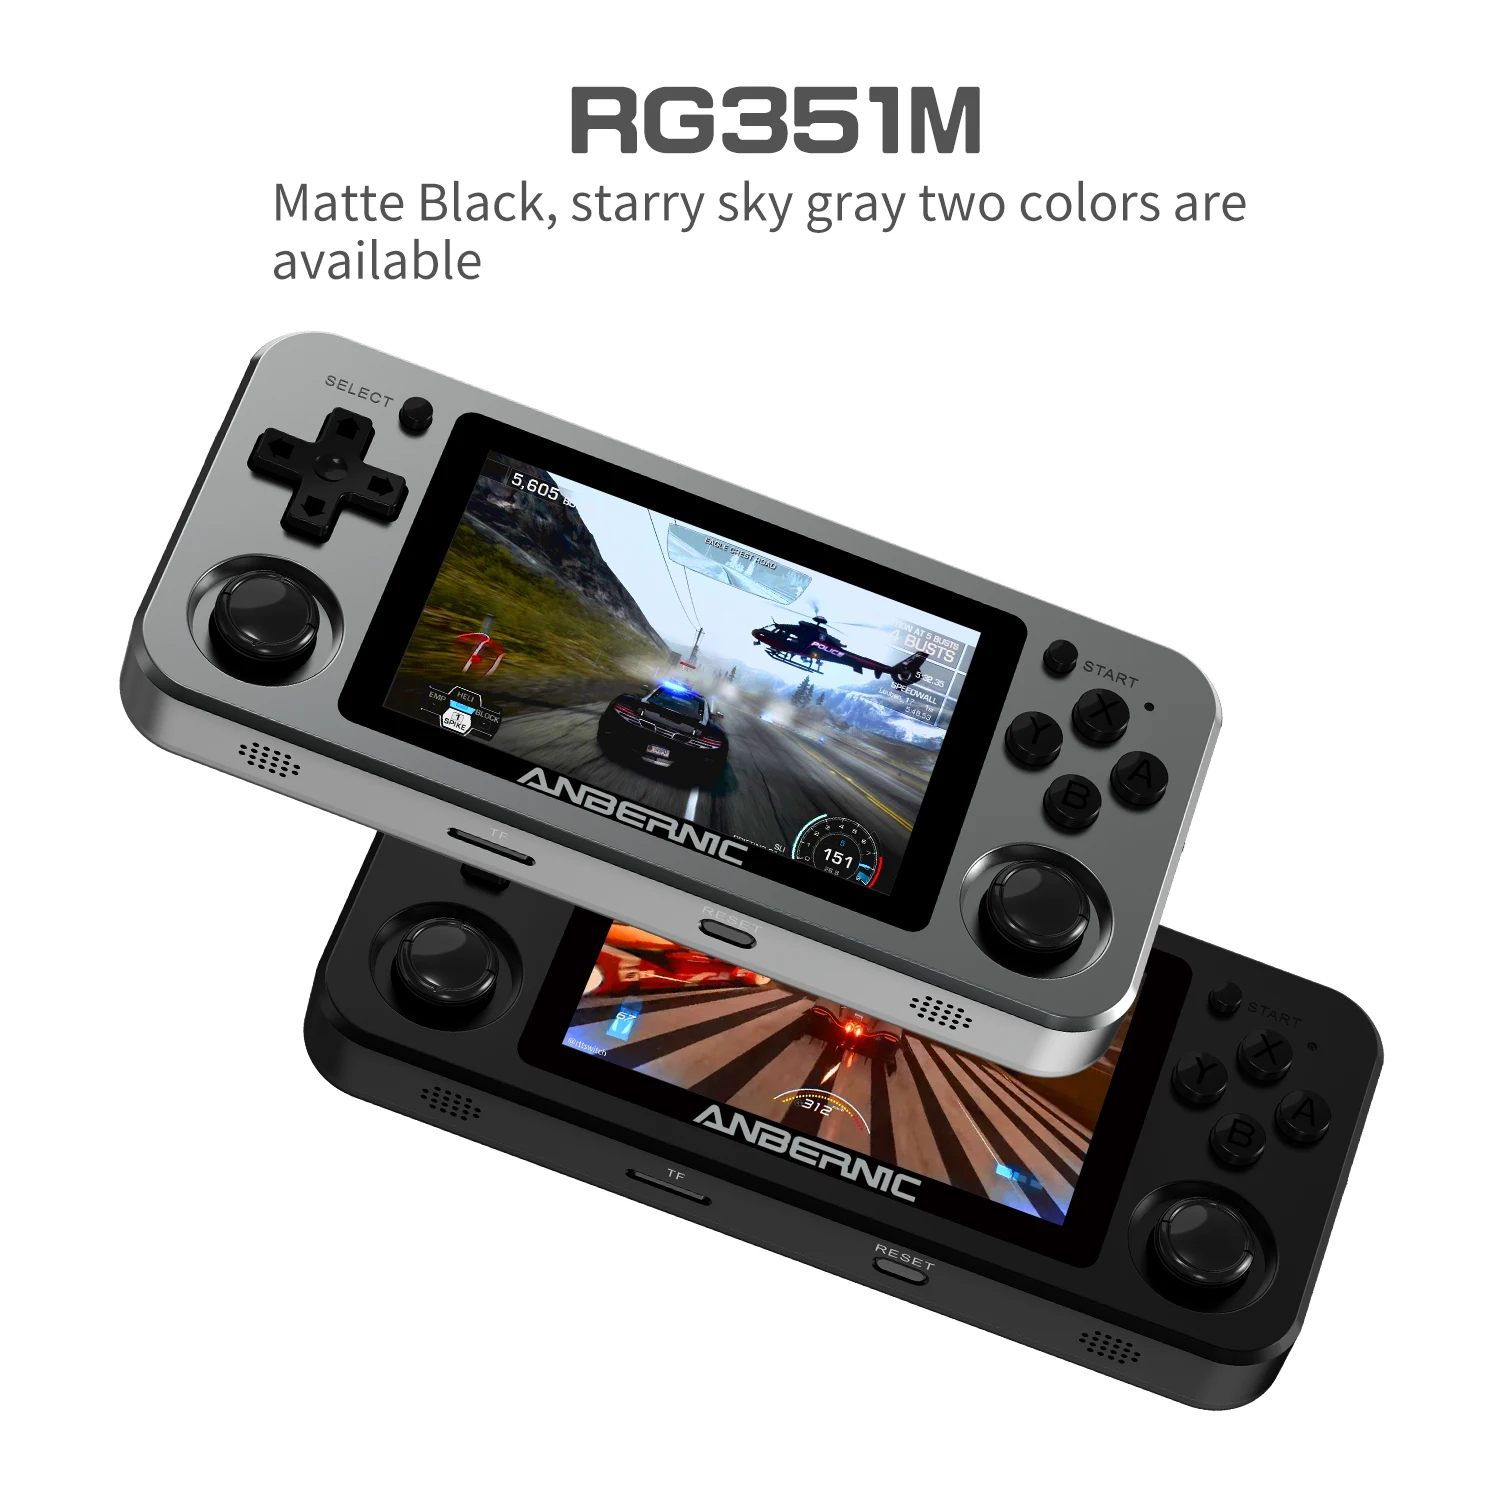 Anbernic Rg351m Retro Game Console Rg351p Upgrade Aluminum Alloy Shell  Rk3326 Built-in Wifi Play Ps1 N64 Dc Dns - Buy Hand Held Game  Consoles